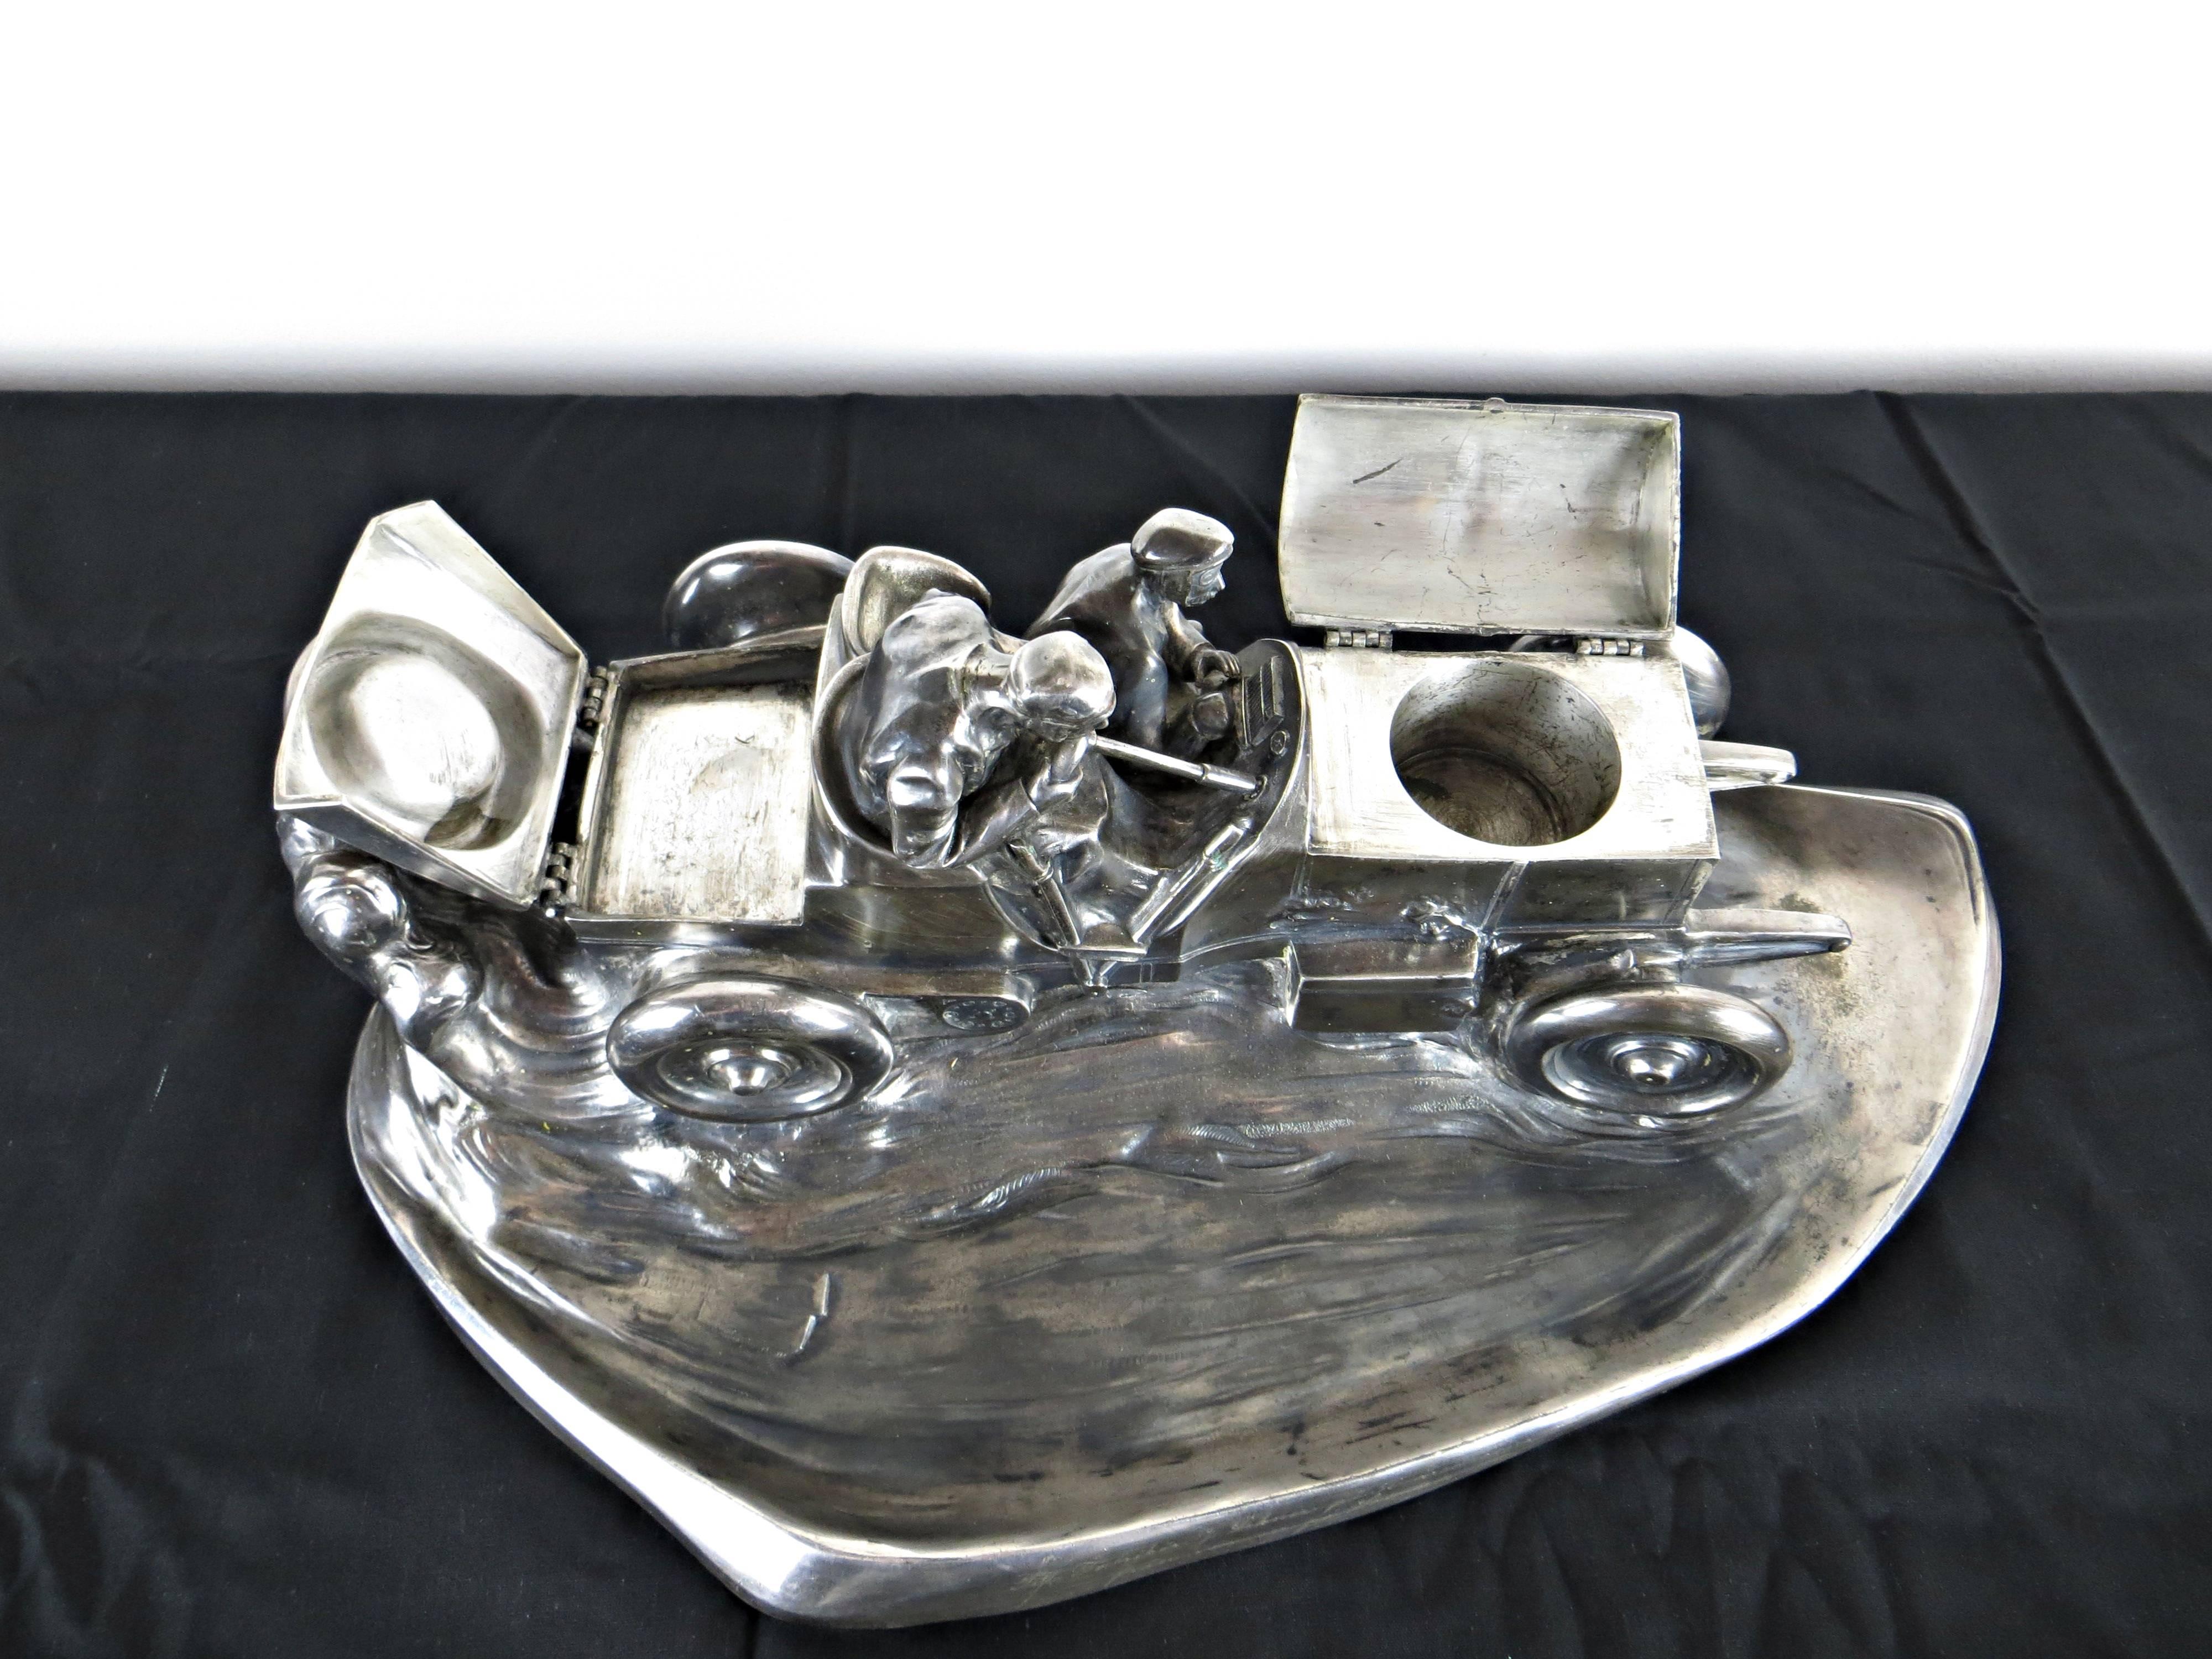 Plated Rare Racing Car Desk Piece by WMF, Germany, 1914